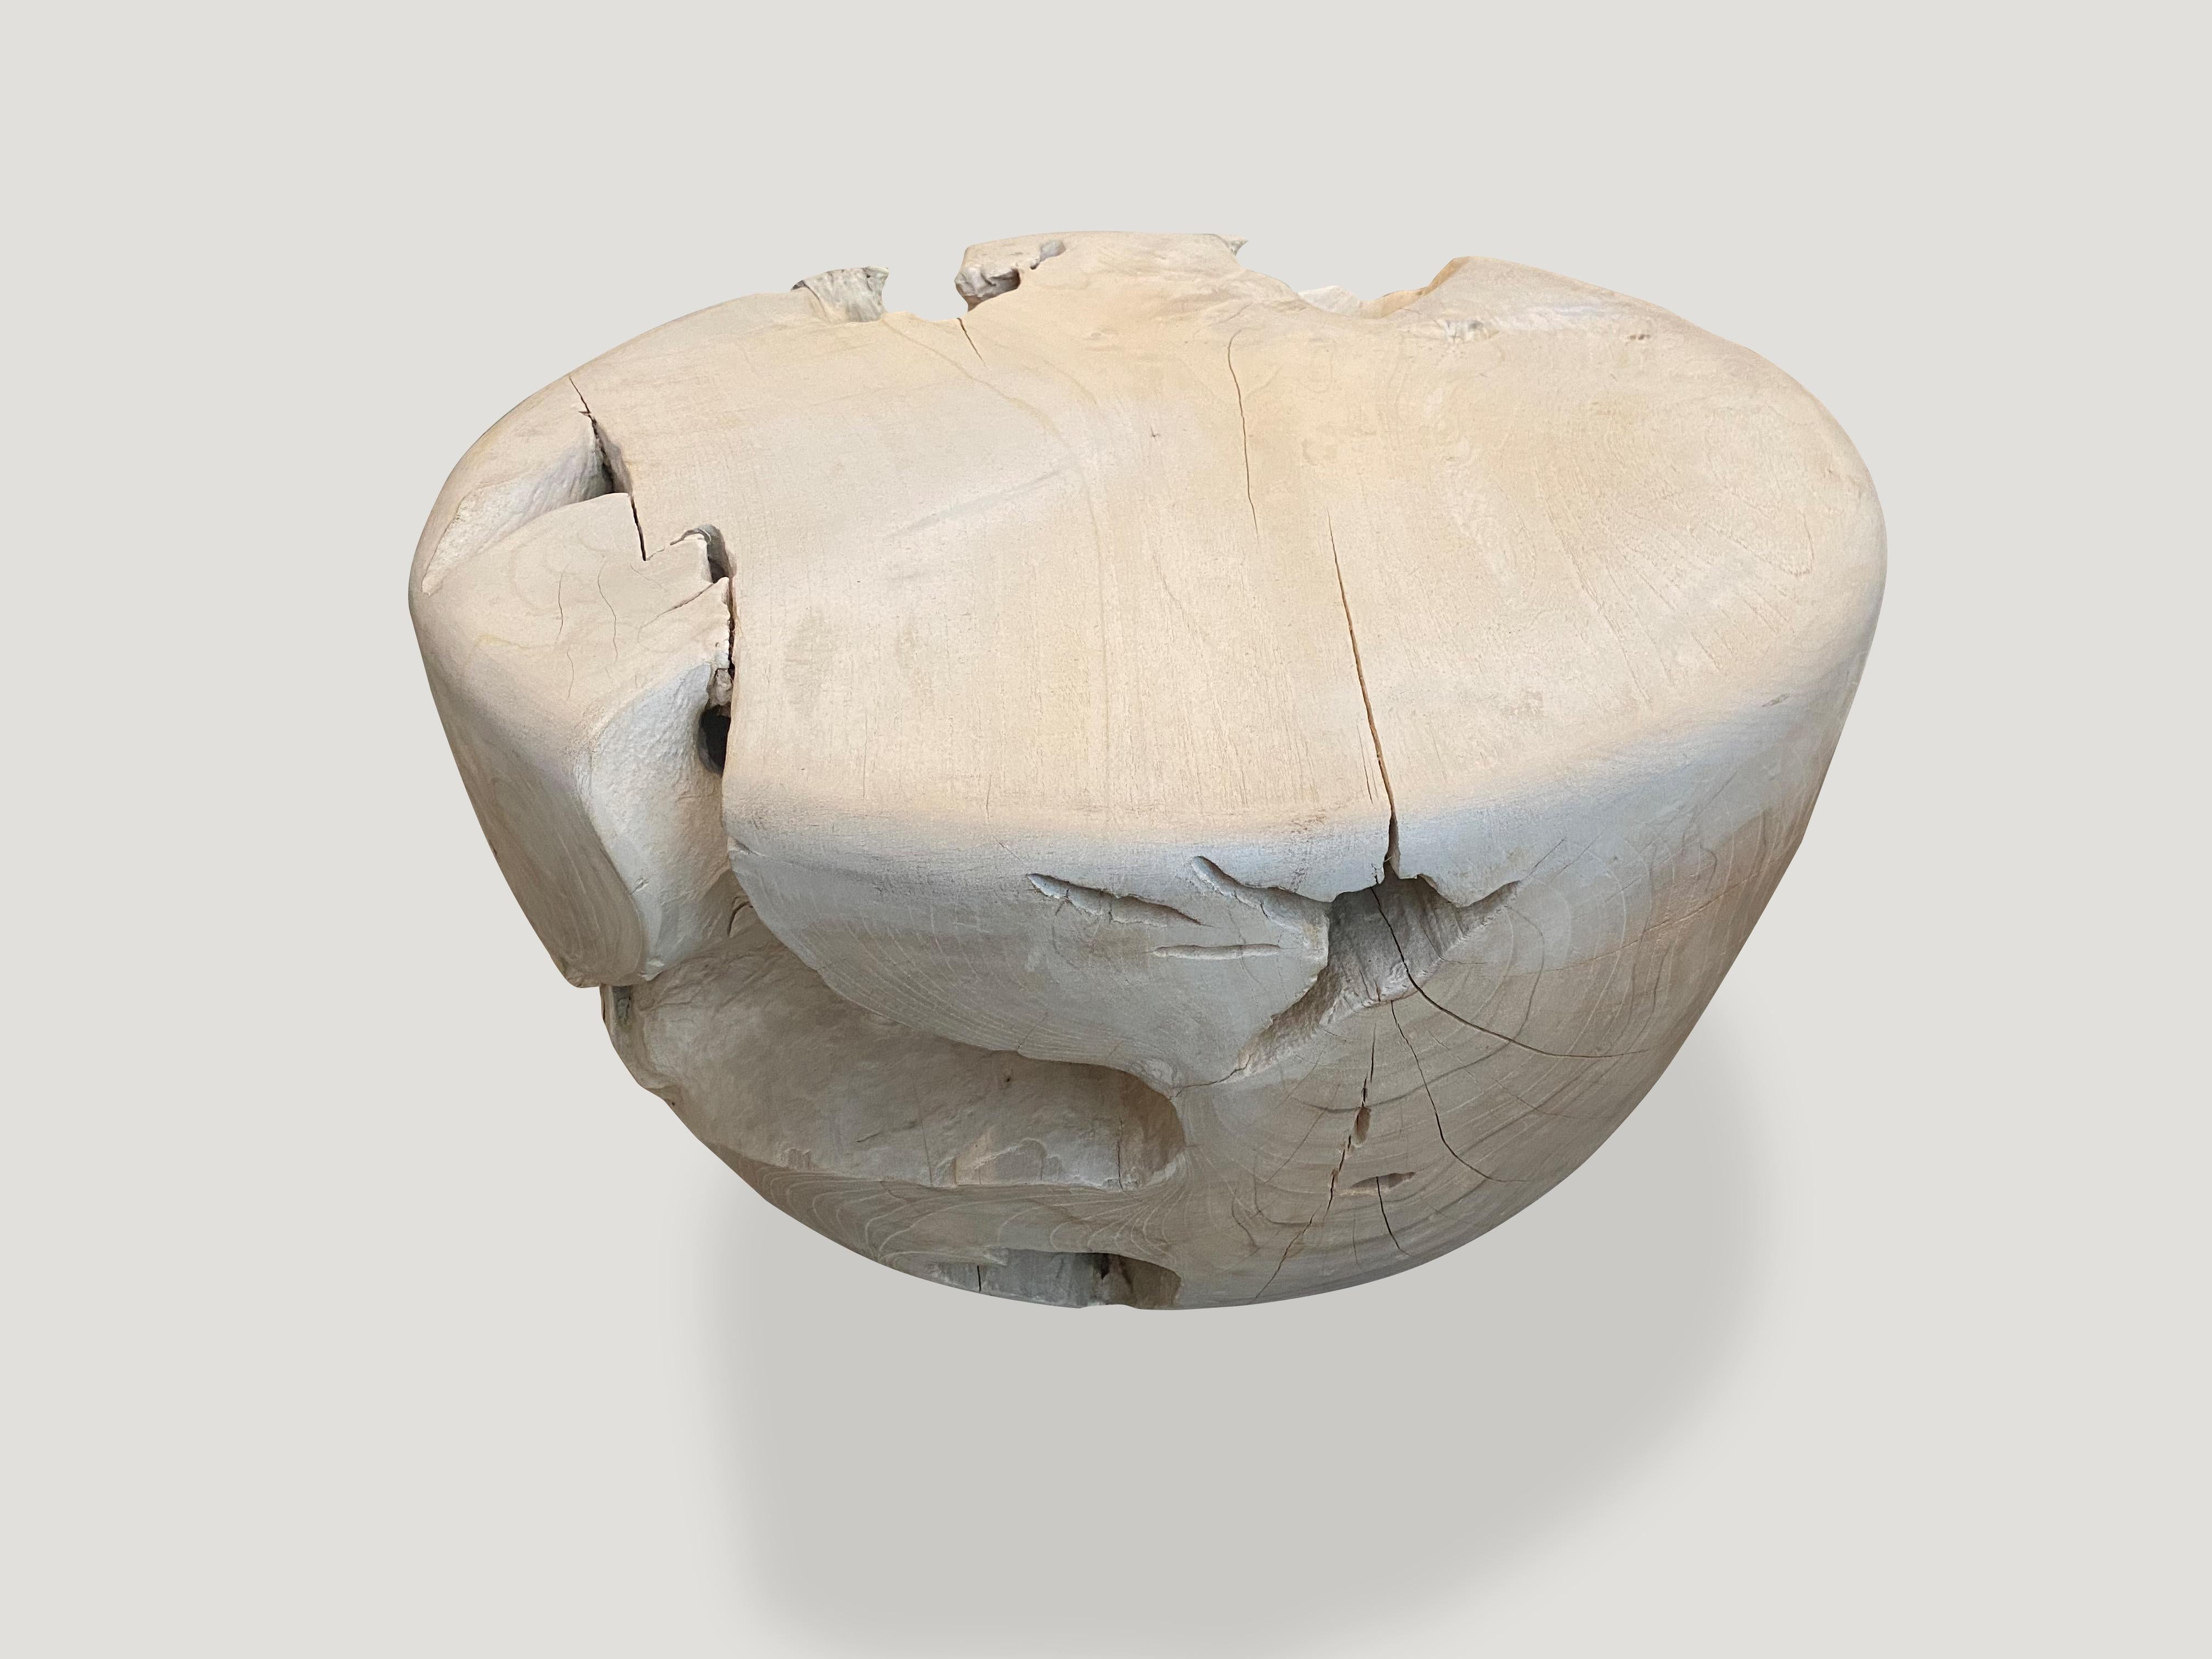 Reclaimed teak root coffee table. Hand carved into a beautiful drum shape from a single piece of reclaimed teak wood and bleached with a smooth finish whilst respecting the natural organic wood. Organic is the new modern.

The St. Barts Collection